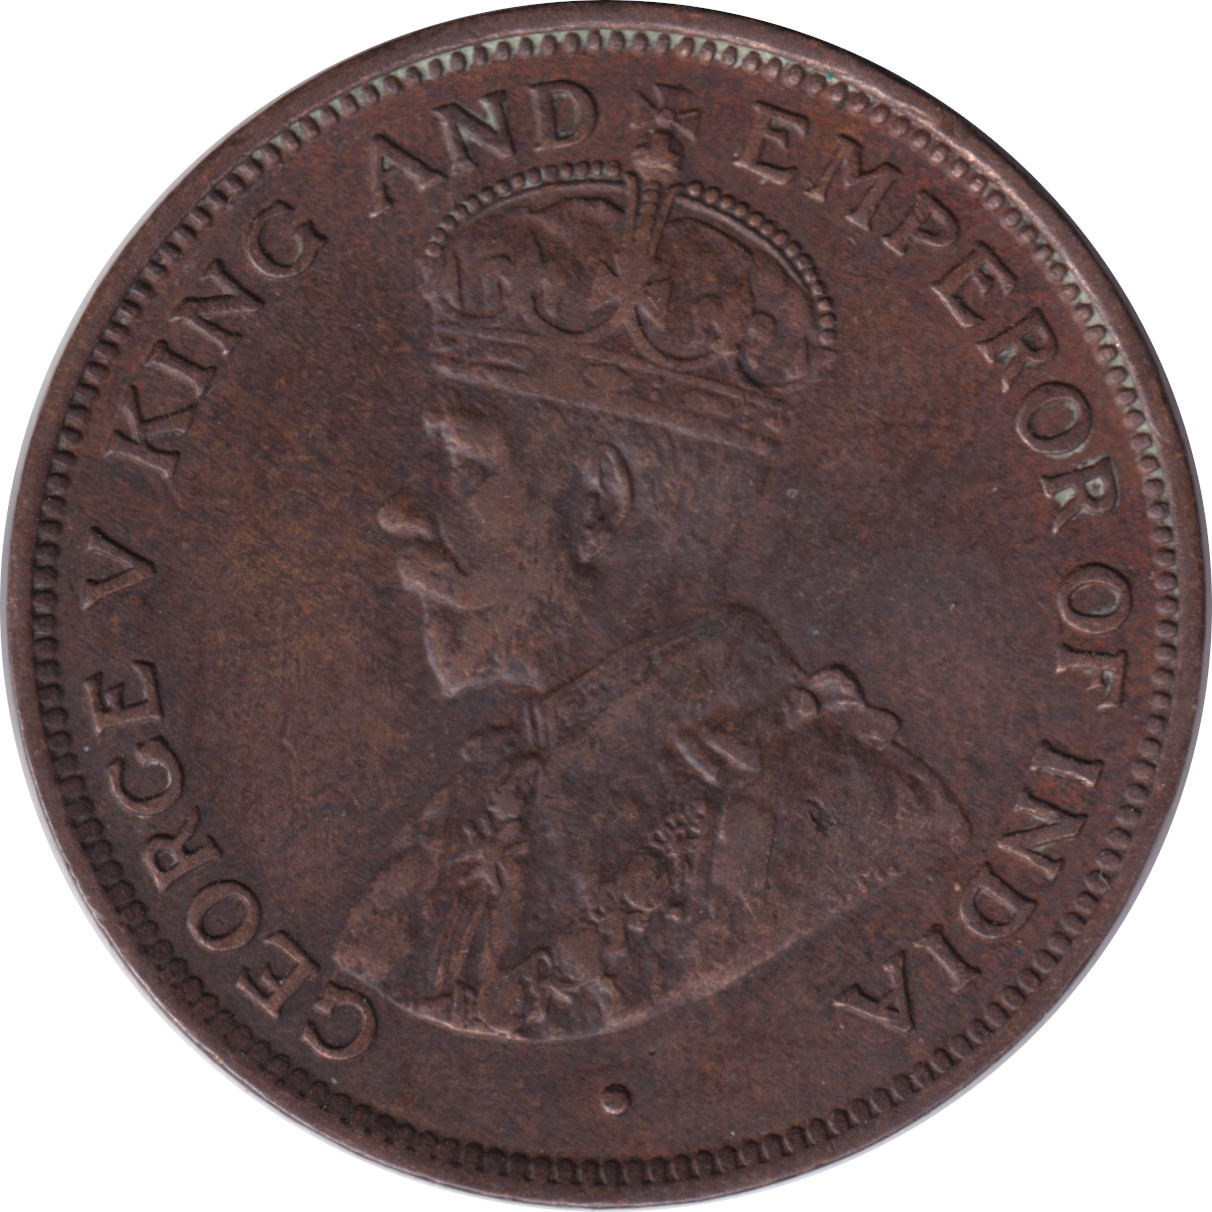 1 cent - George V - Rameaux centraux